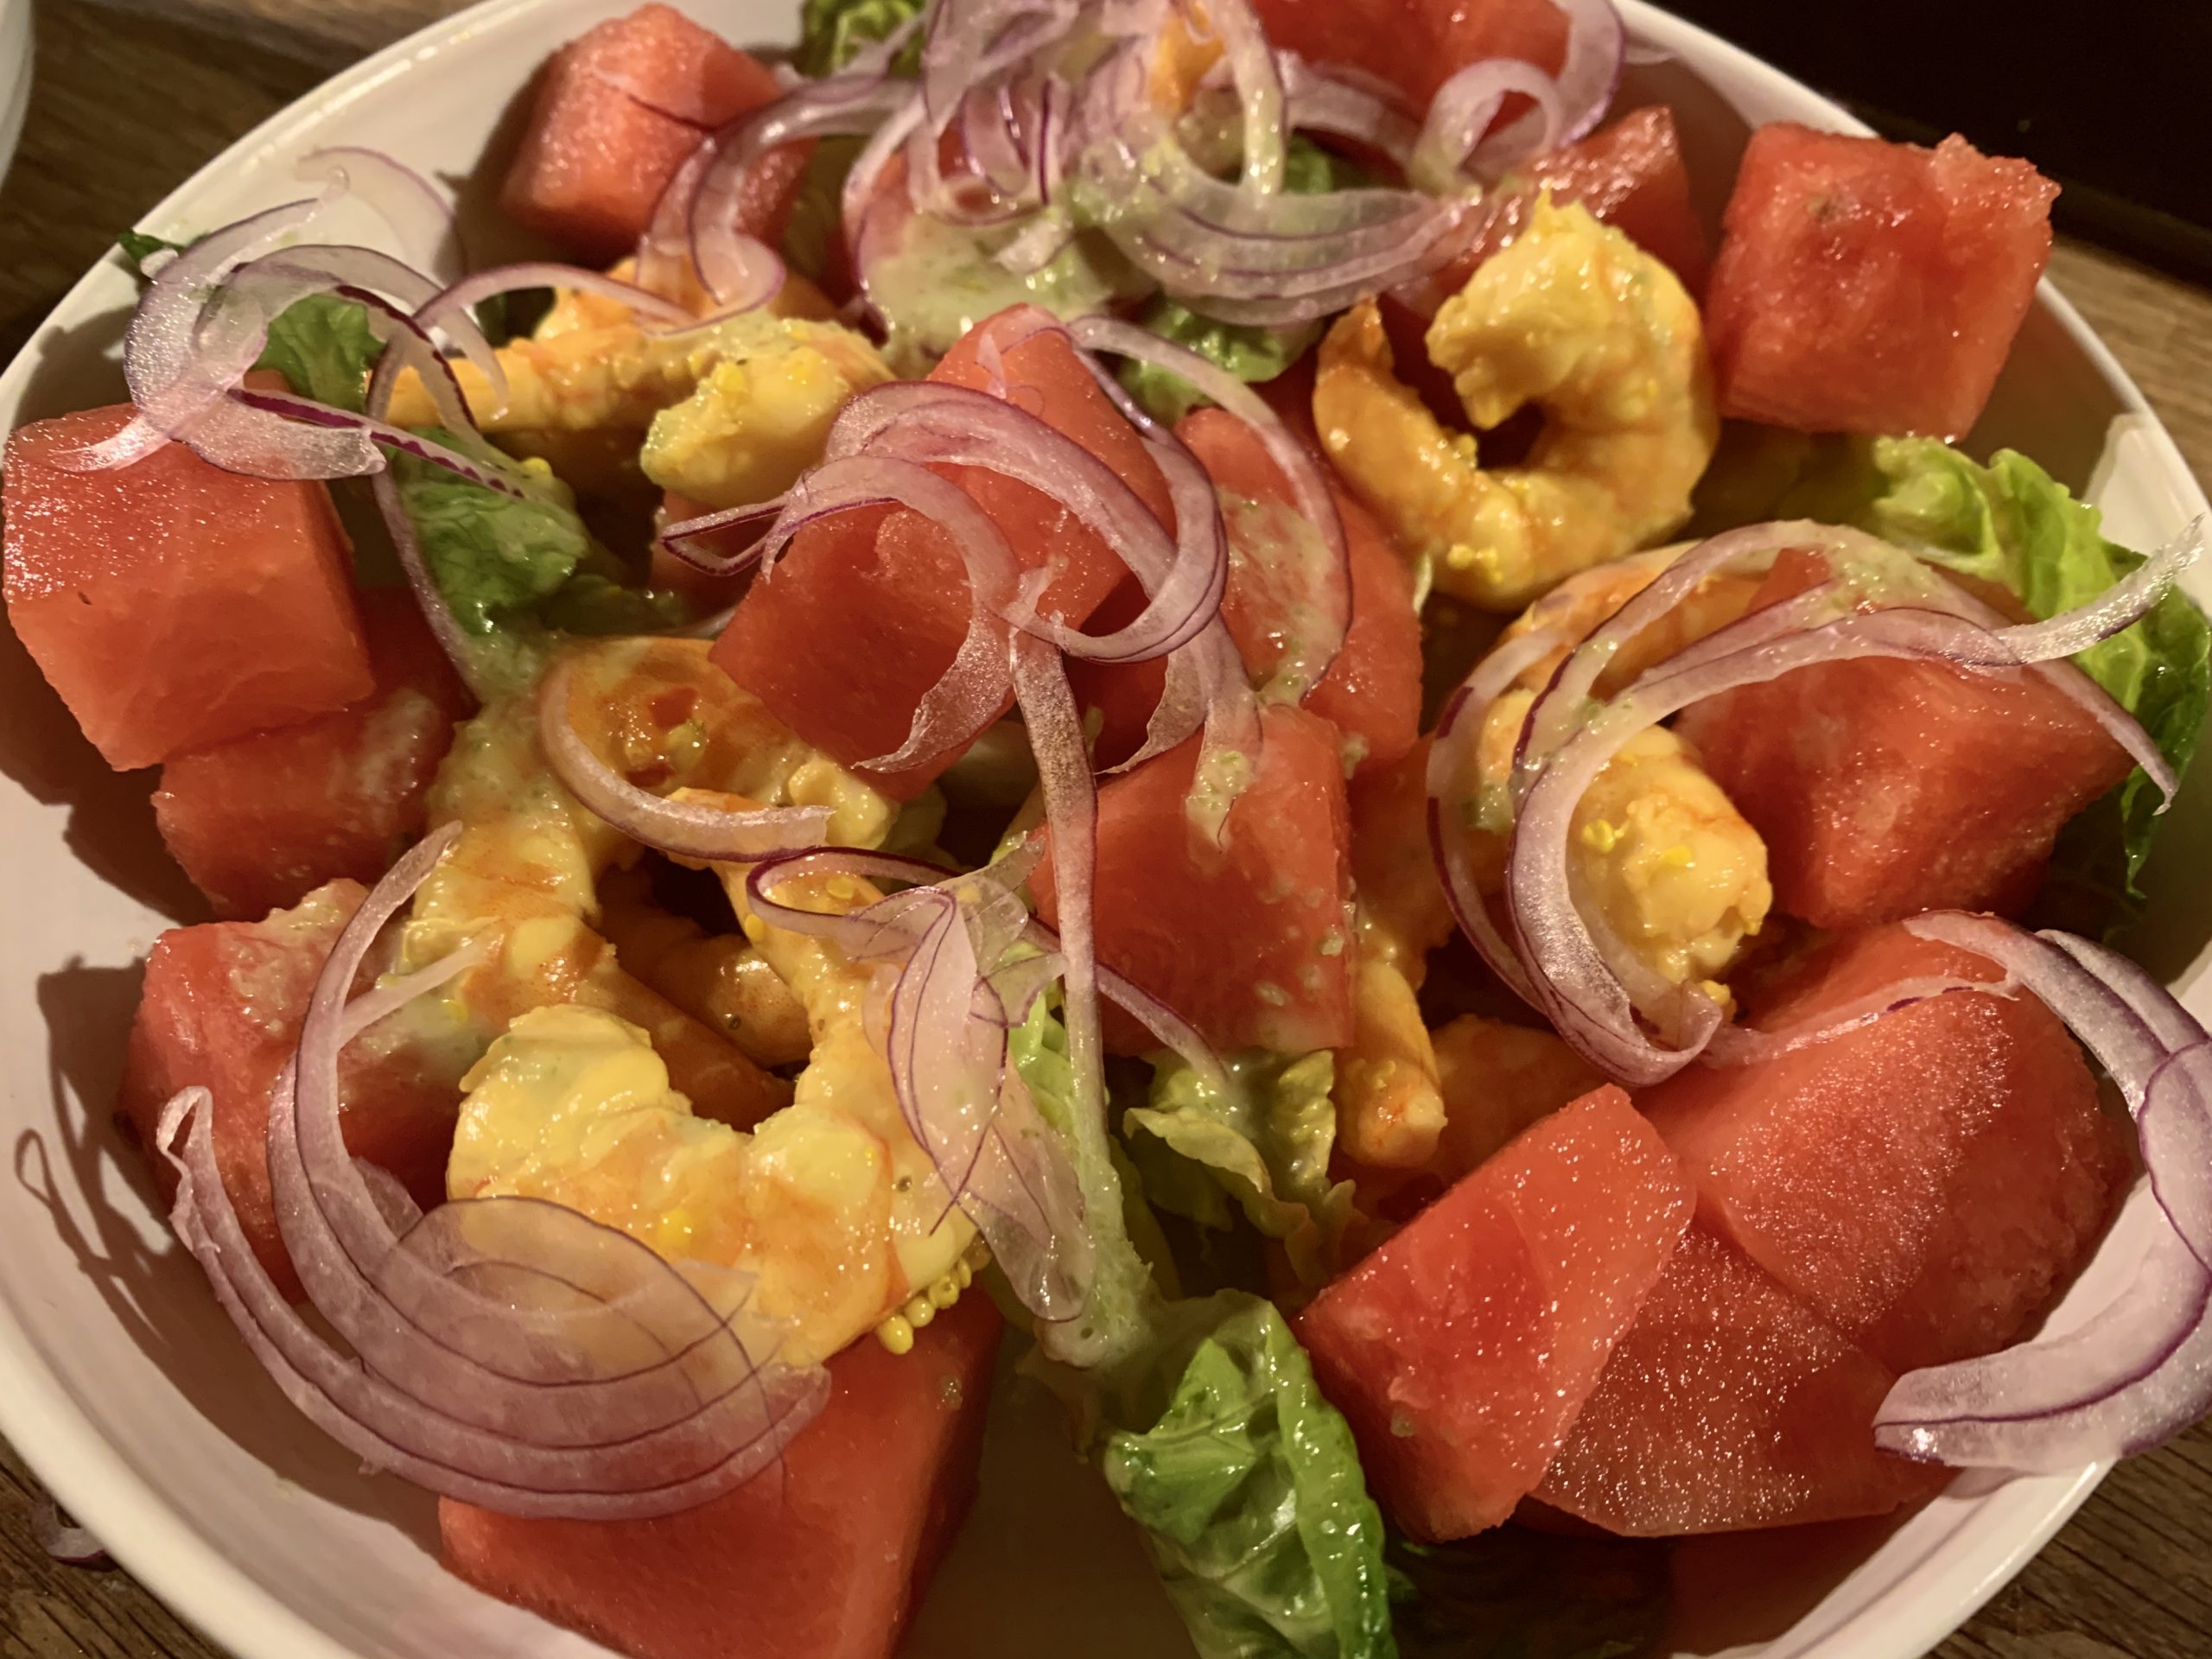 Watermelon and Red Onion Salad with Lettuce, Pickled Shrimp and Jalapeño Vinaigrette